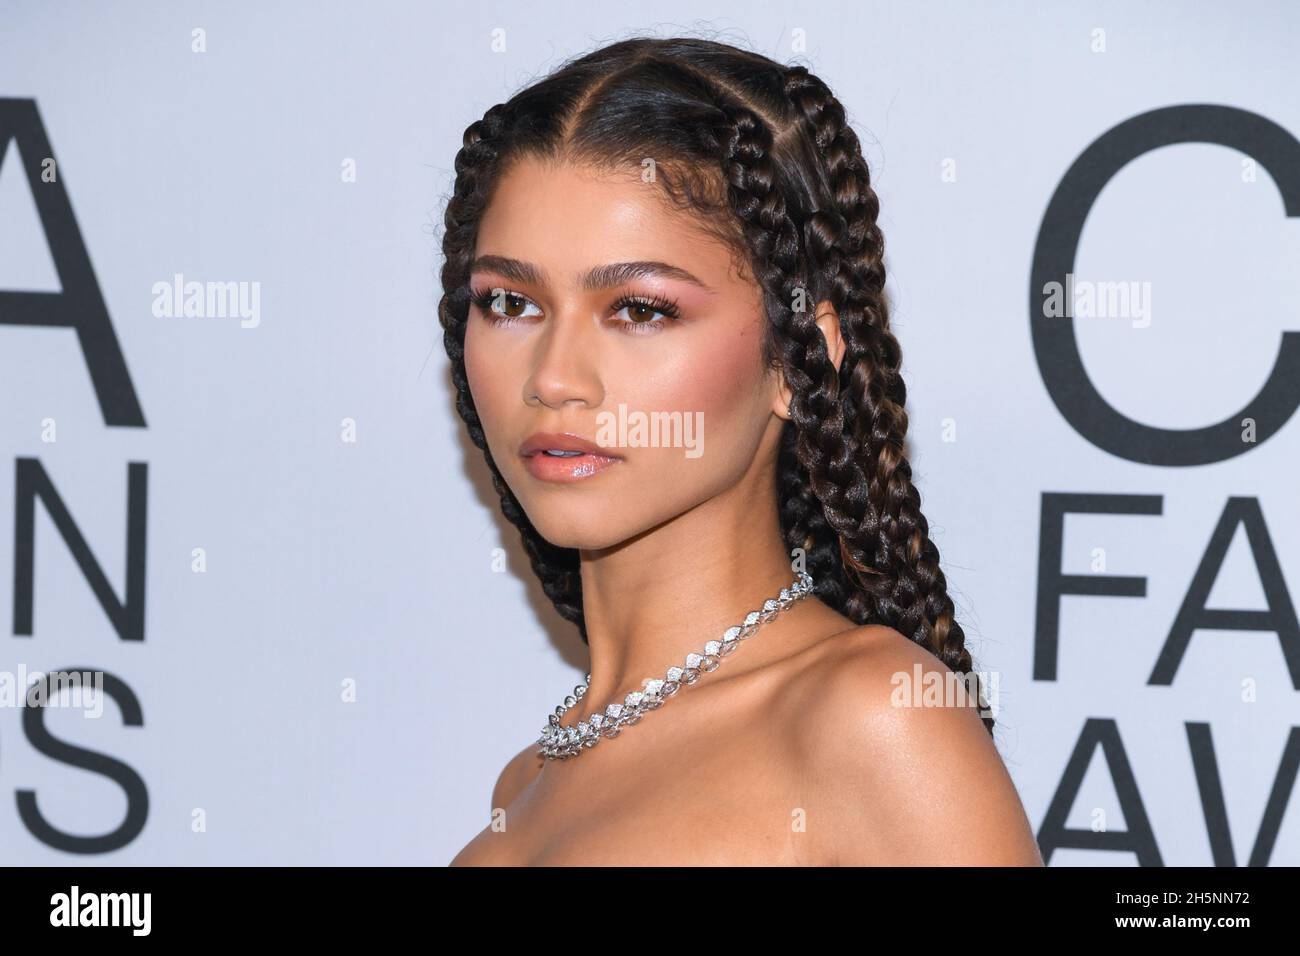 Zendaya wearing Vera Wang walking on the red carpet at the 2021 CFDA Fashion Awards held at The Pool   The Grill in New York, NY on Nov. 10, 2021. (Photo by Anthony Behar/Sipa USA) Credit: Sipa USA/Alamy Live News Stock Photo